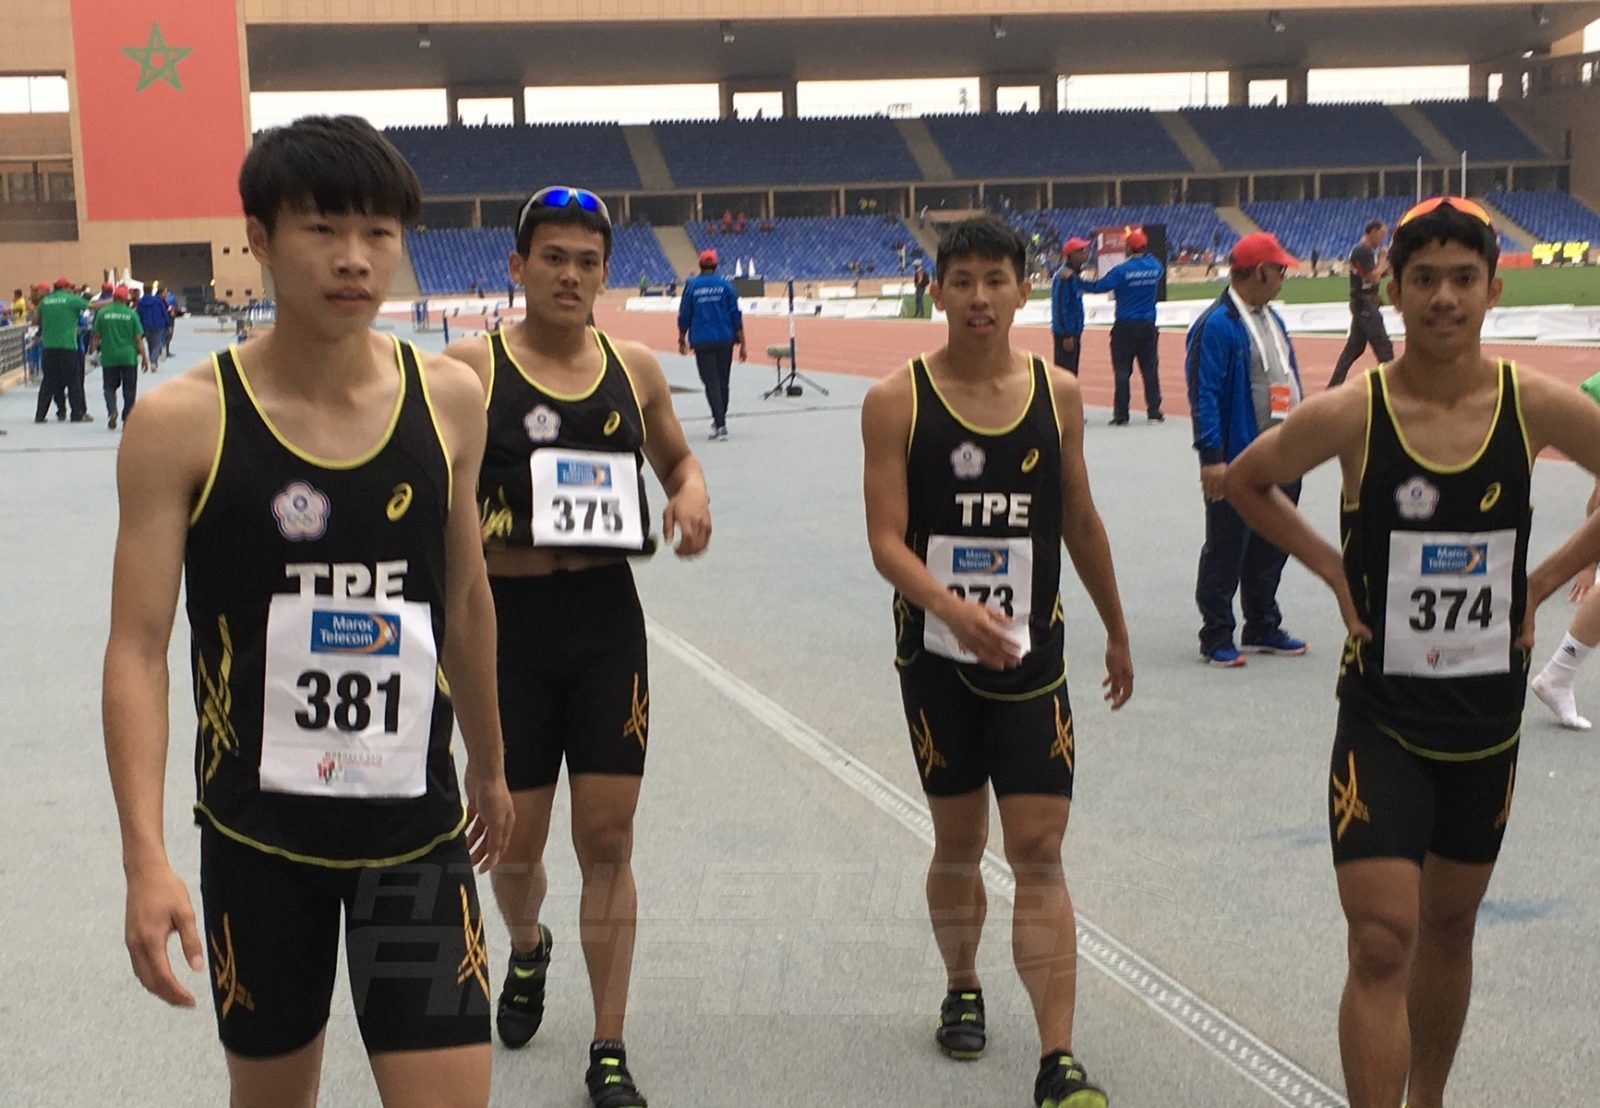 The Chinese Taipei quartet after the Boys 4x100m final at Gymnasiade 2018 in Marrakech / Photo Credit: Yomi Omogbeja